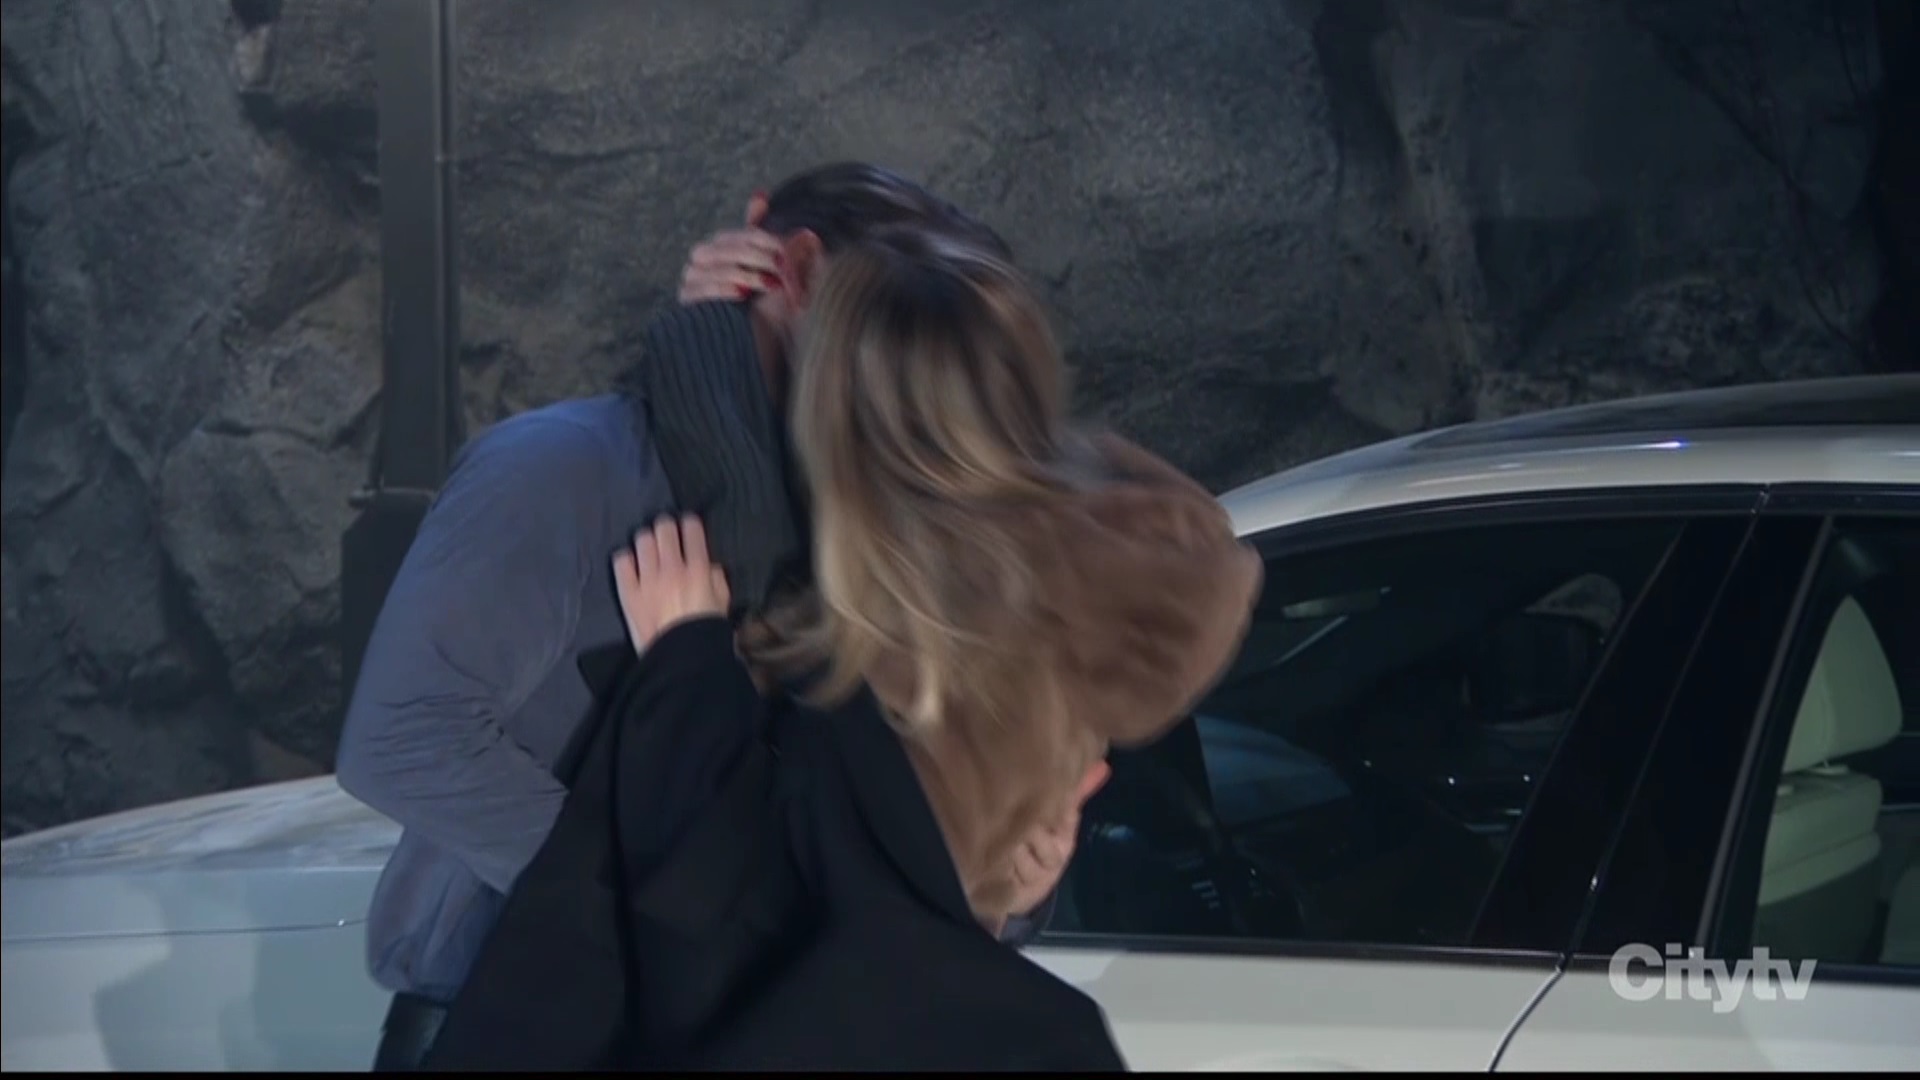 joss and dex kiss by her car GH recaps SoapsSpoilers